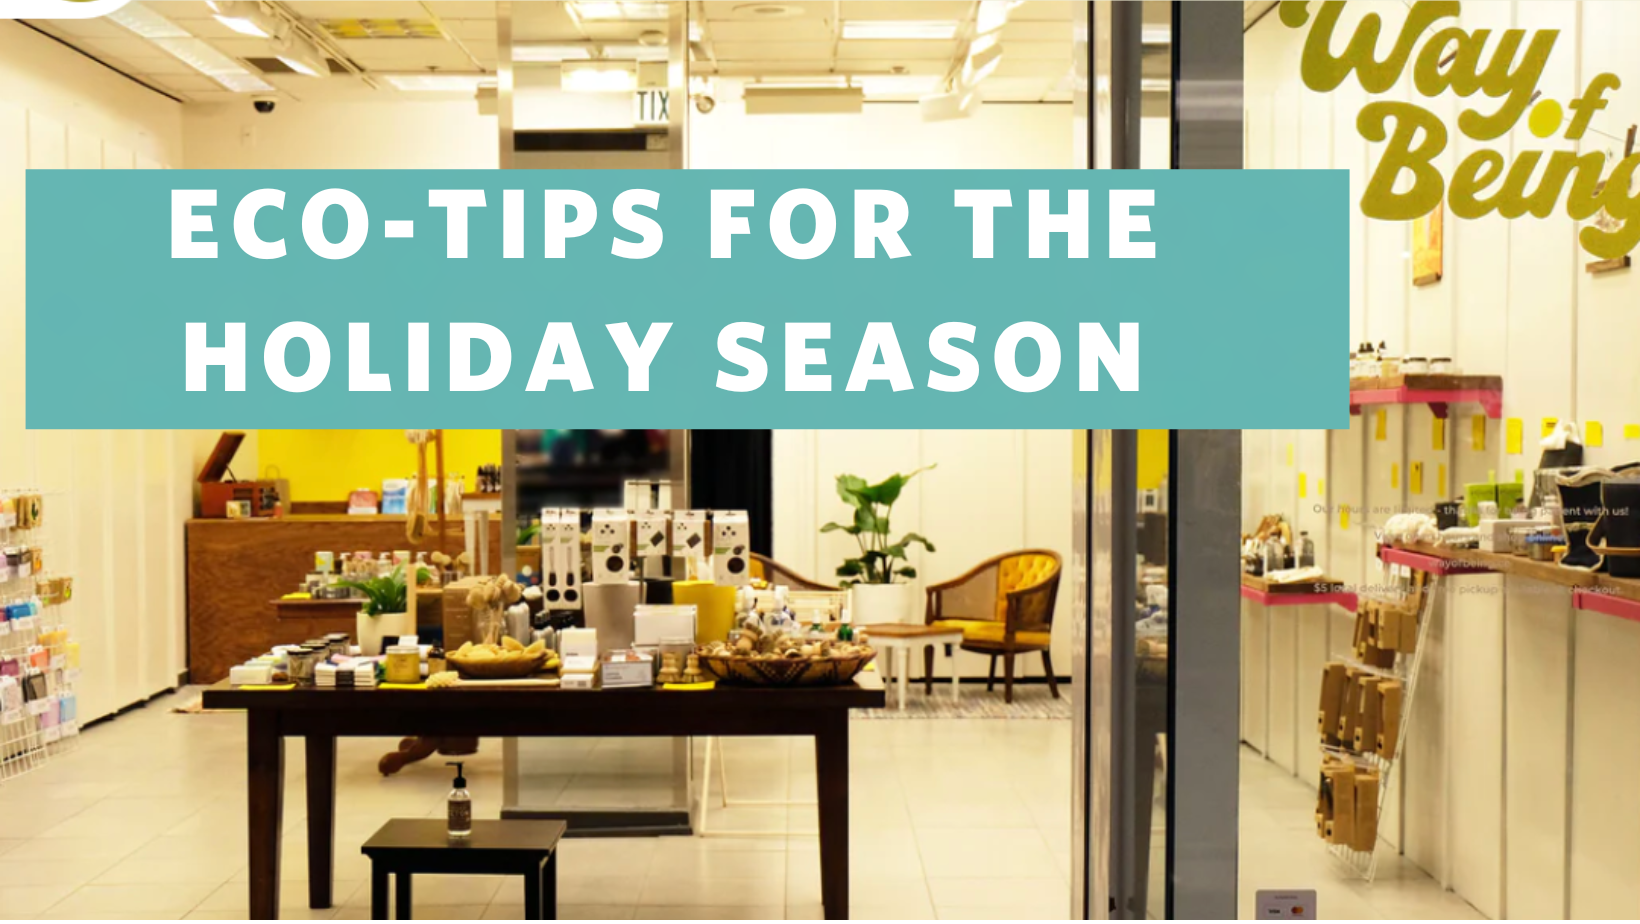 image of the Way of Being store front with the words "Eco-Tips for the Holiday Season" overlaid